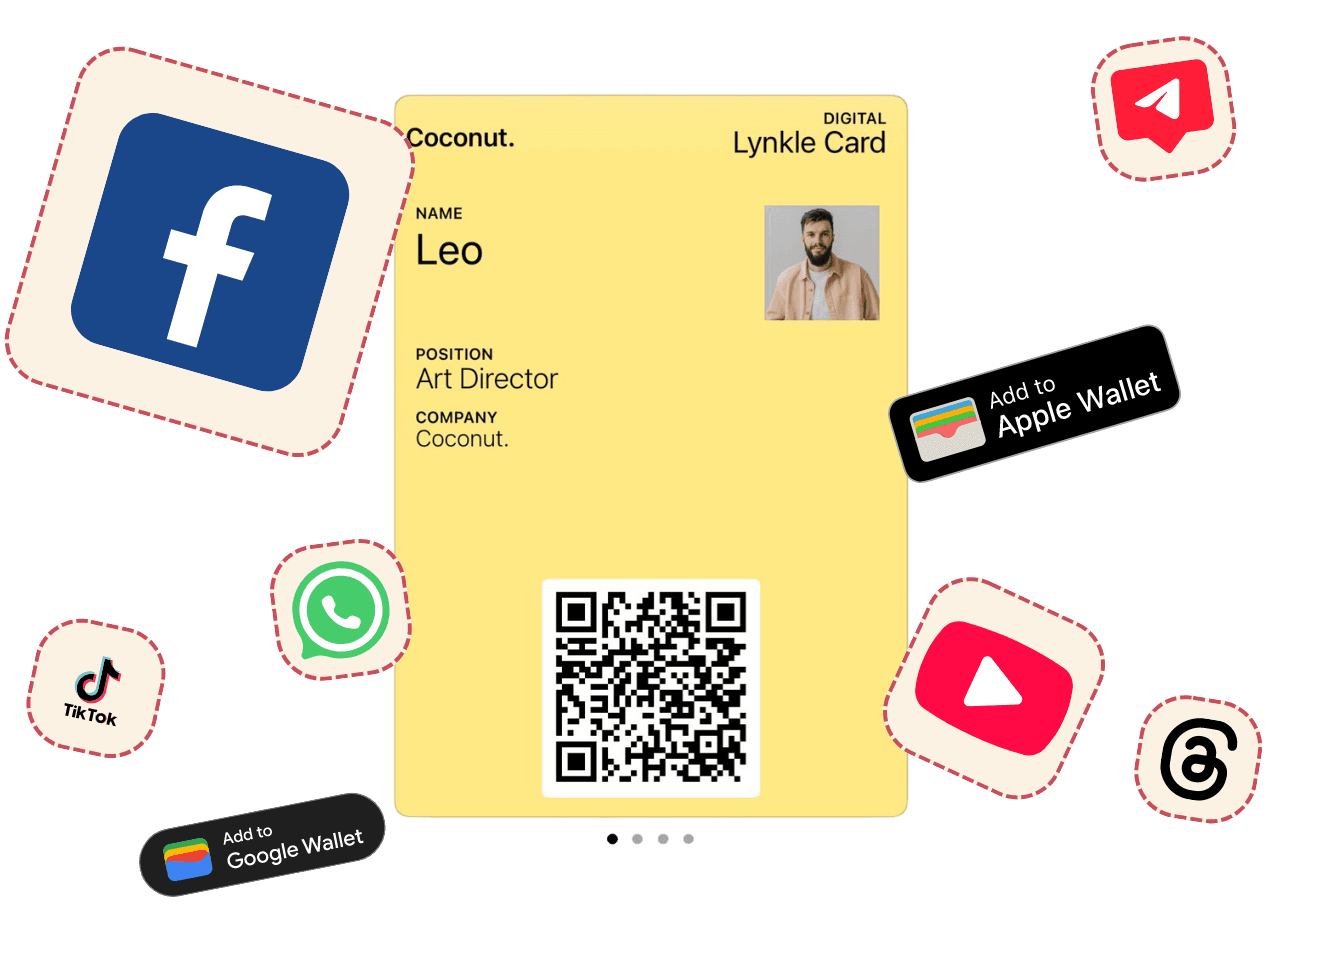 Share your digital business card anywhere